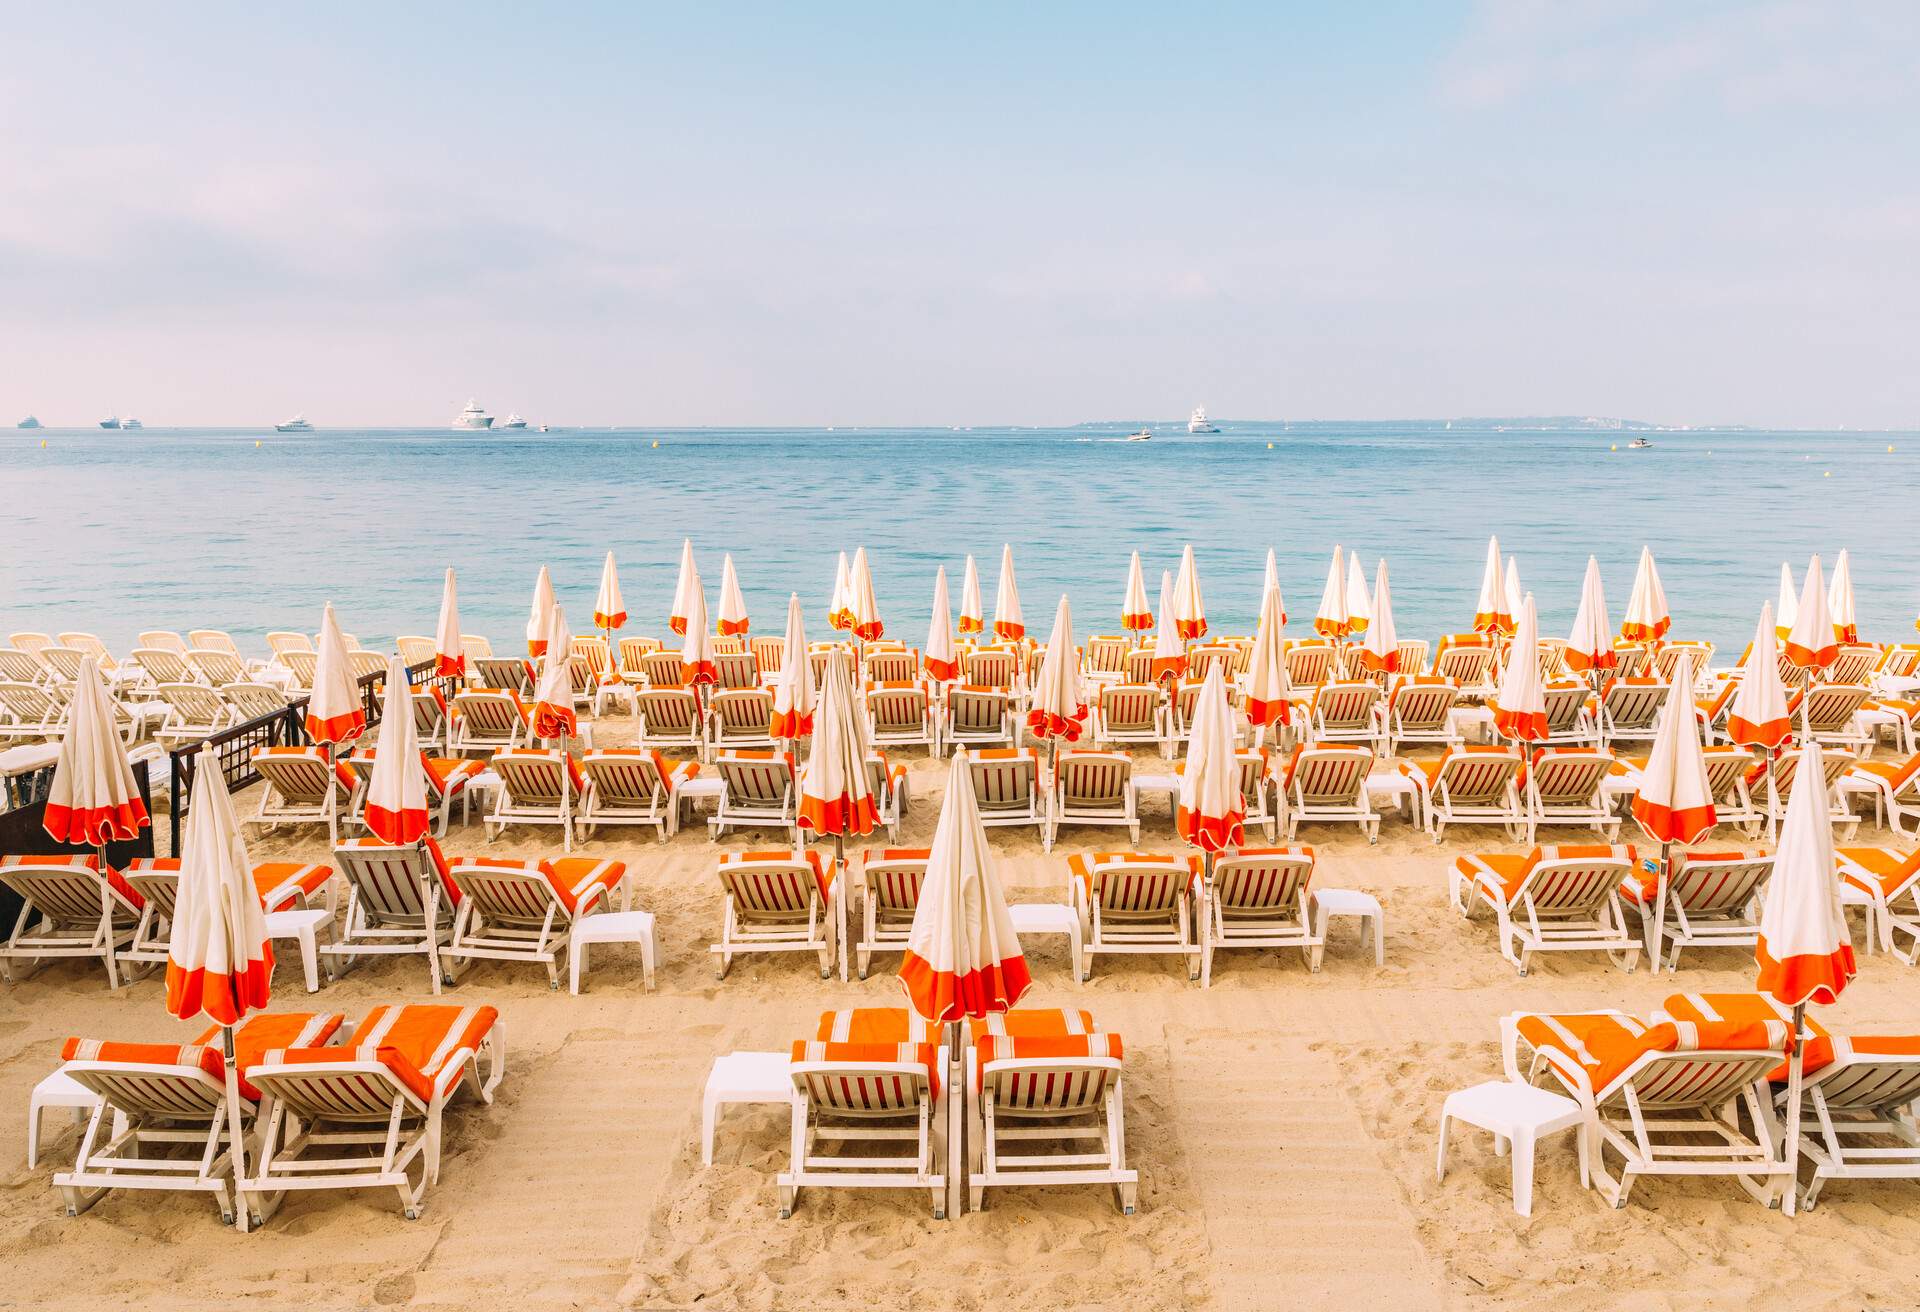 Sun loungers with umbrellas on the sand looking out at the stunning beach.